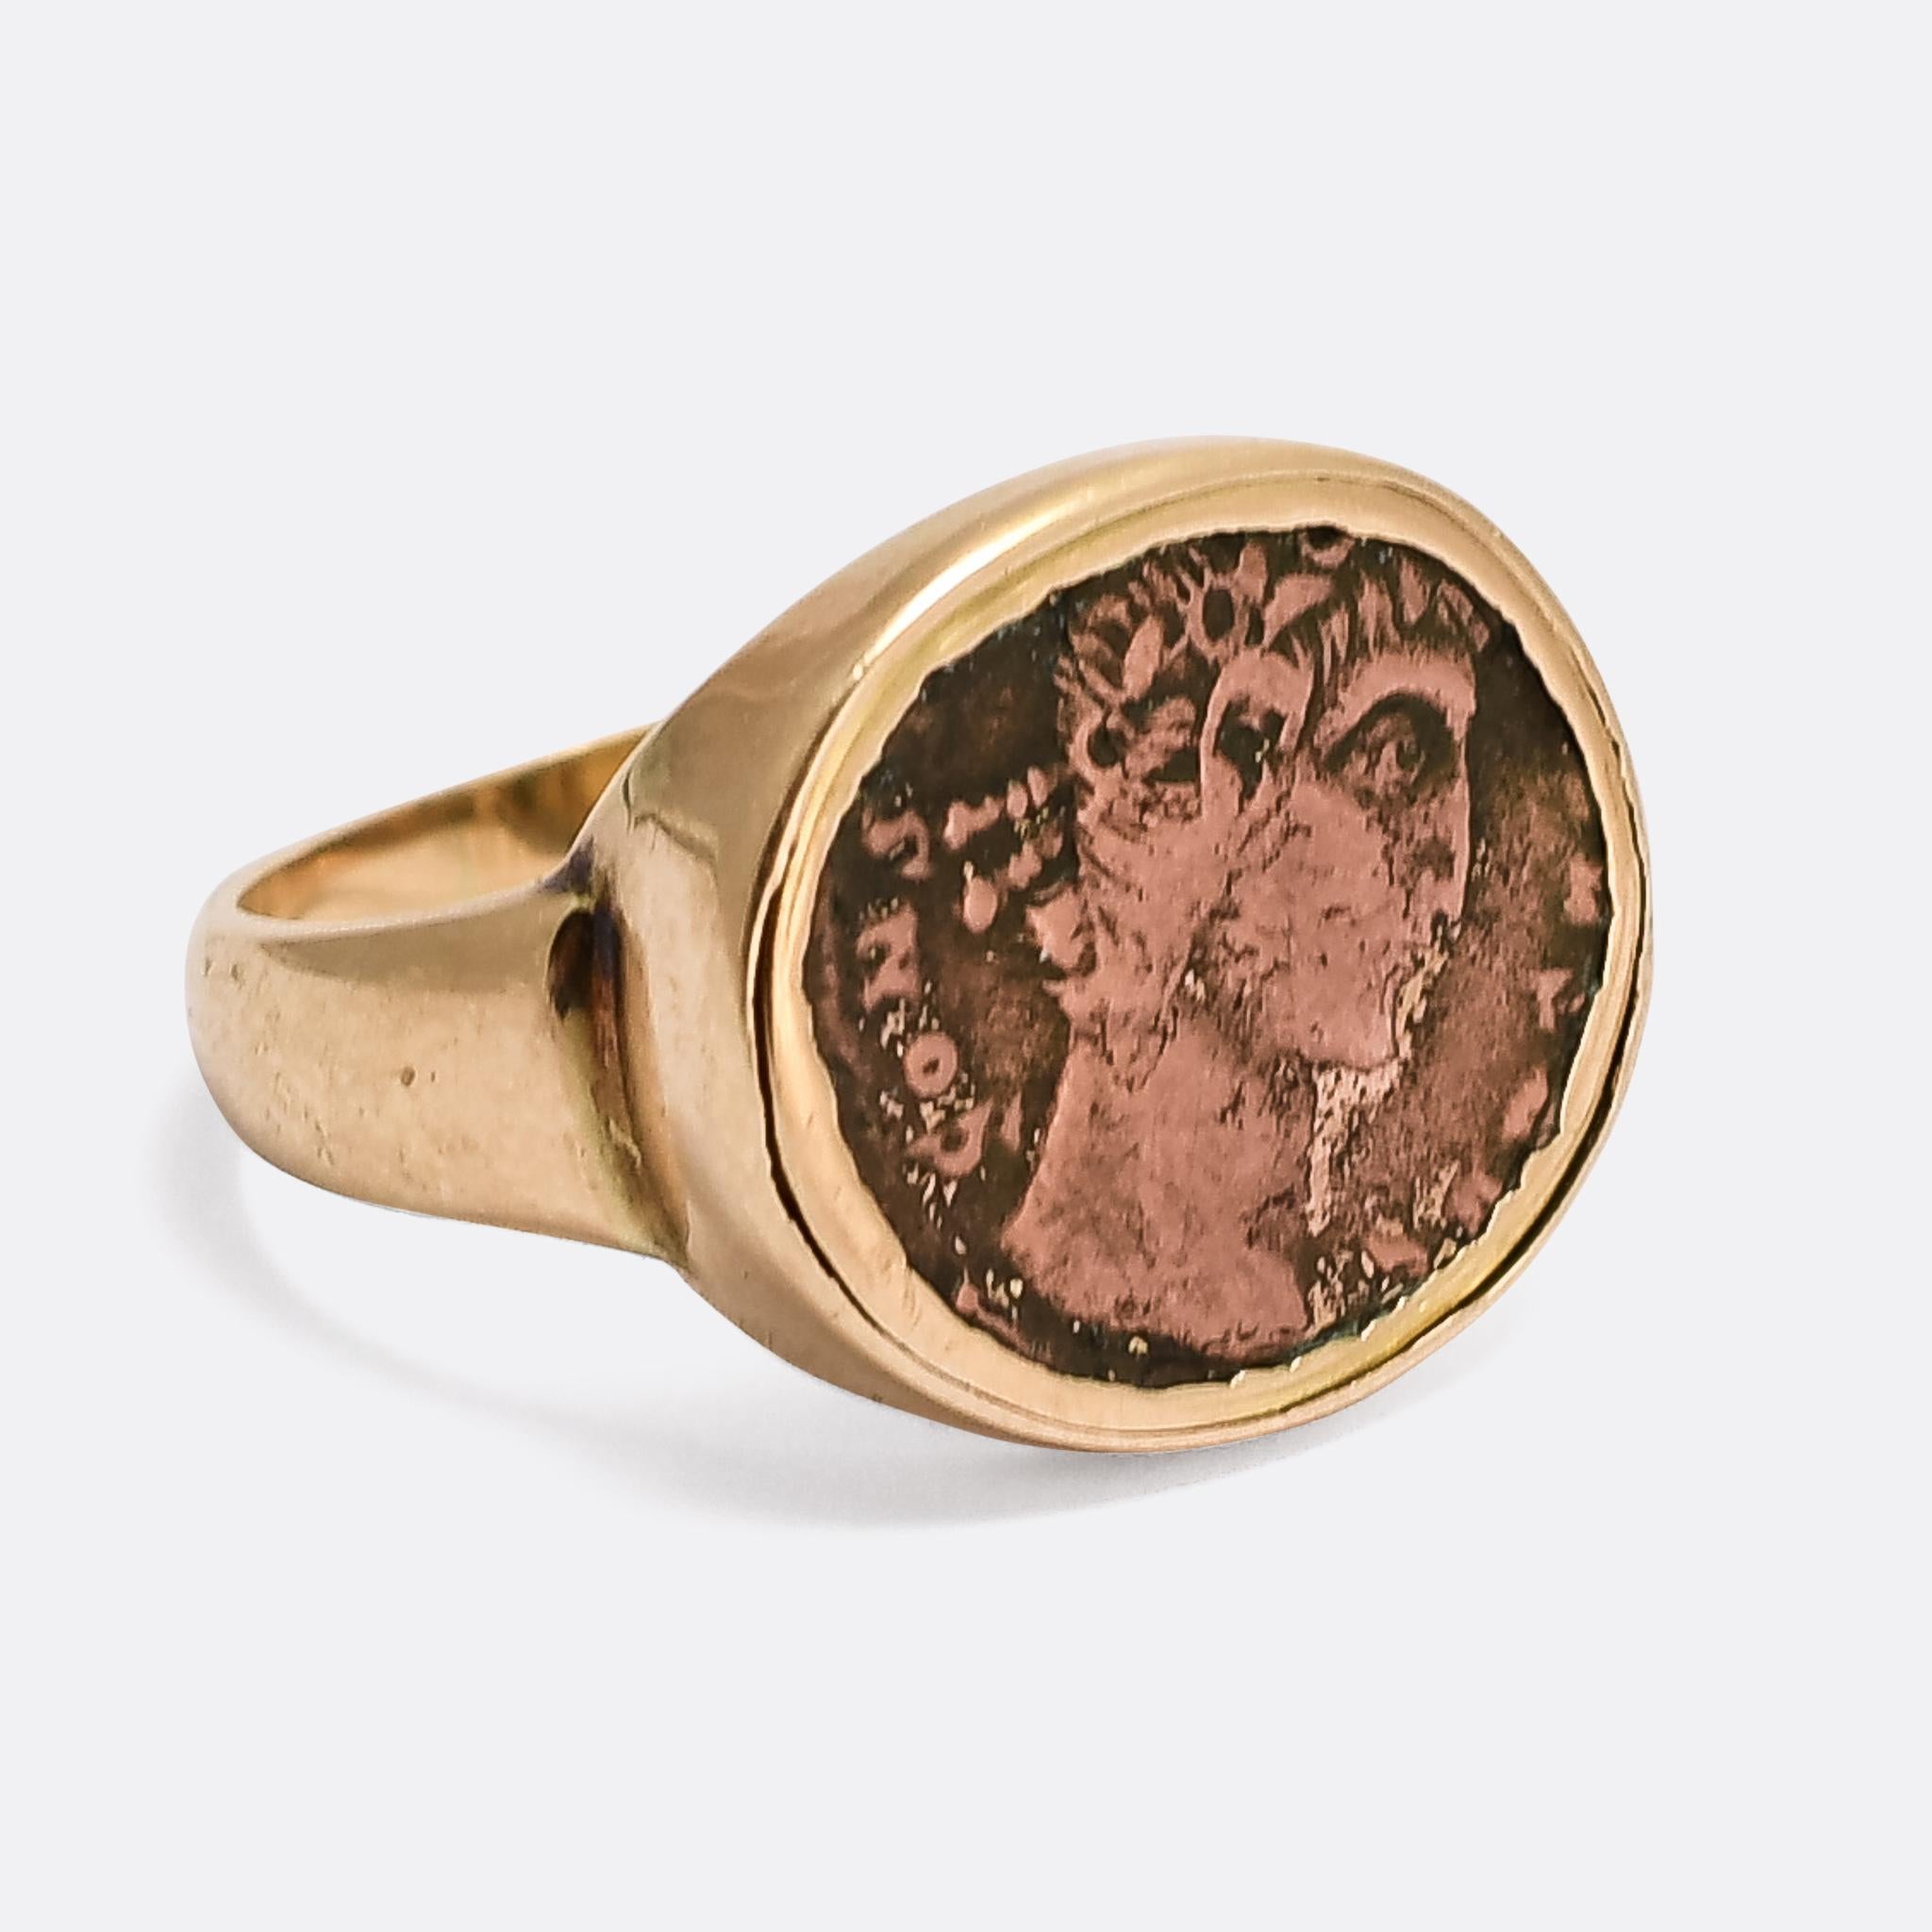 An exceptional Georgian signet ring set with a 4th century Roman coin. The coin is a bronze follis (AE4) and was minted for Constantine The Great, circa AD 320. It's set into an elegantly proportioned 18k gold ring mount that dates from the very